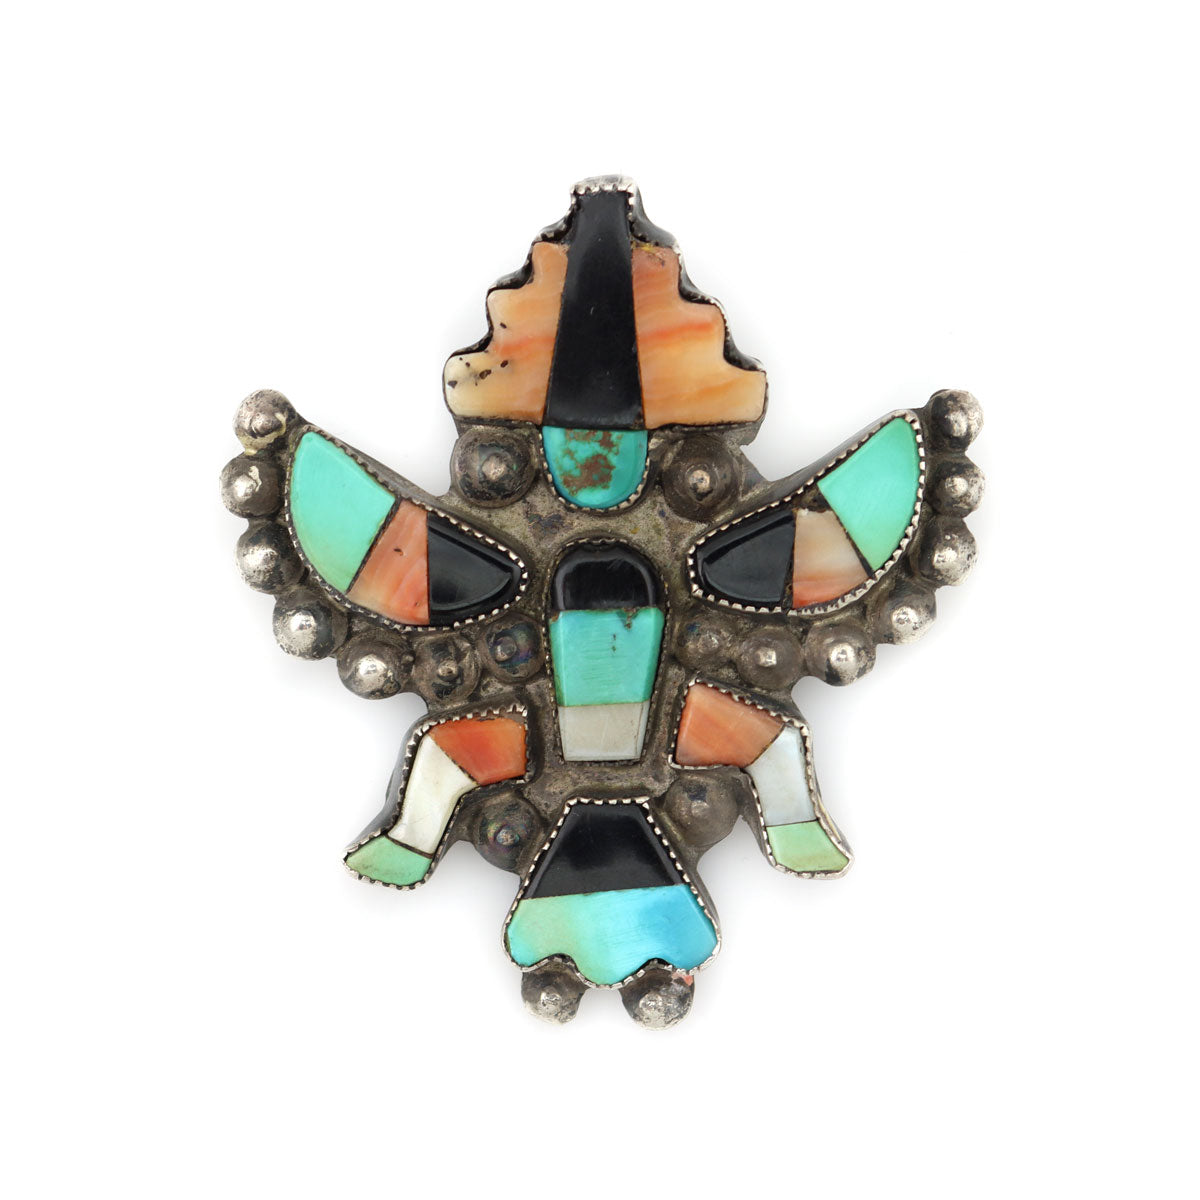 Zuni Multi-Stone Inlay and Silver Knifewing God Pin c. 1940s, 2.125" x 2" (J14031-CO)